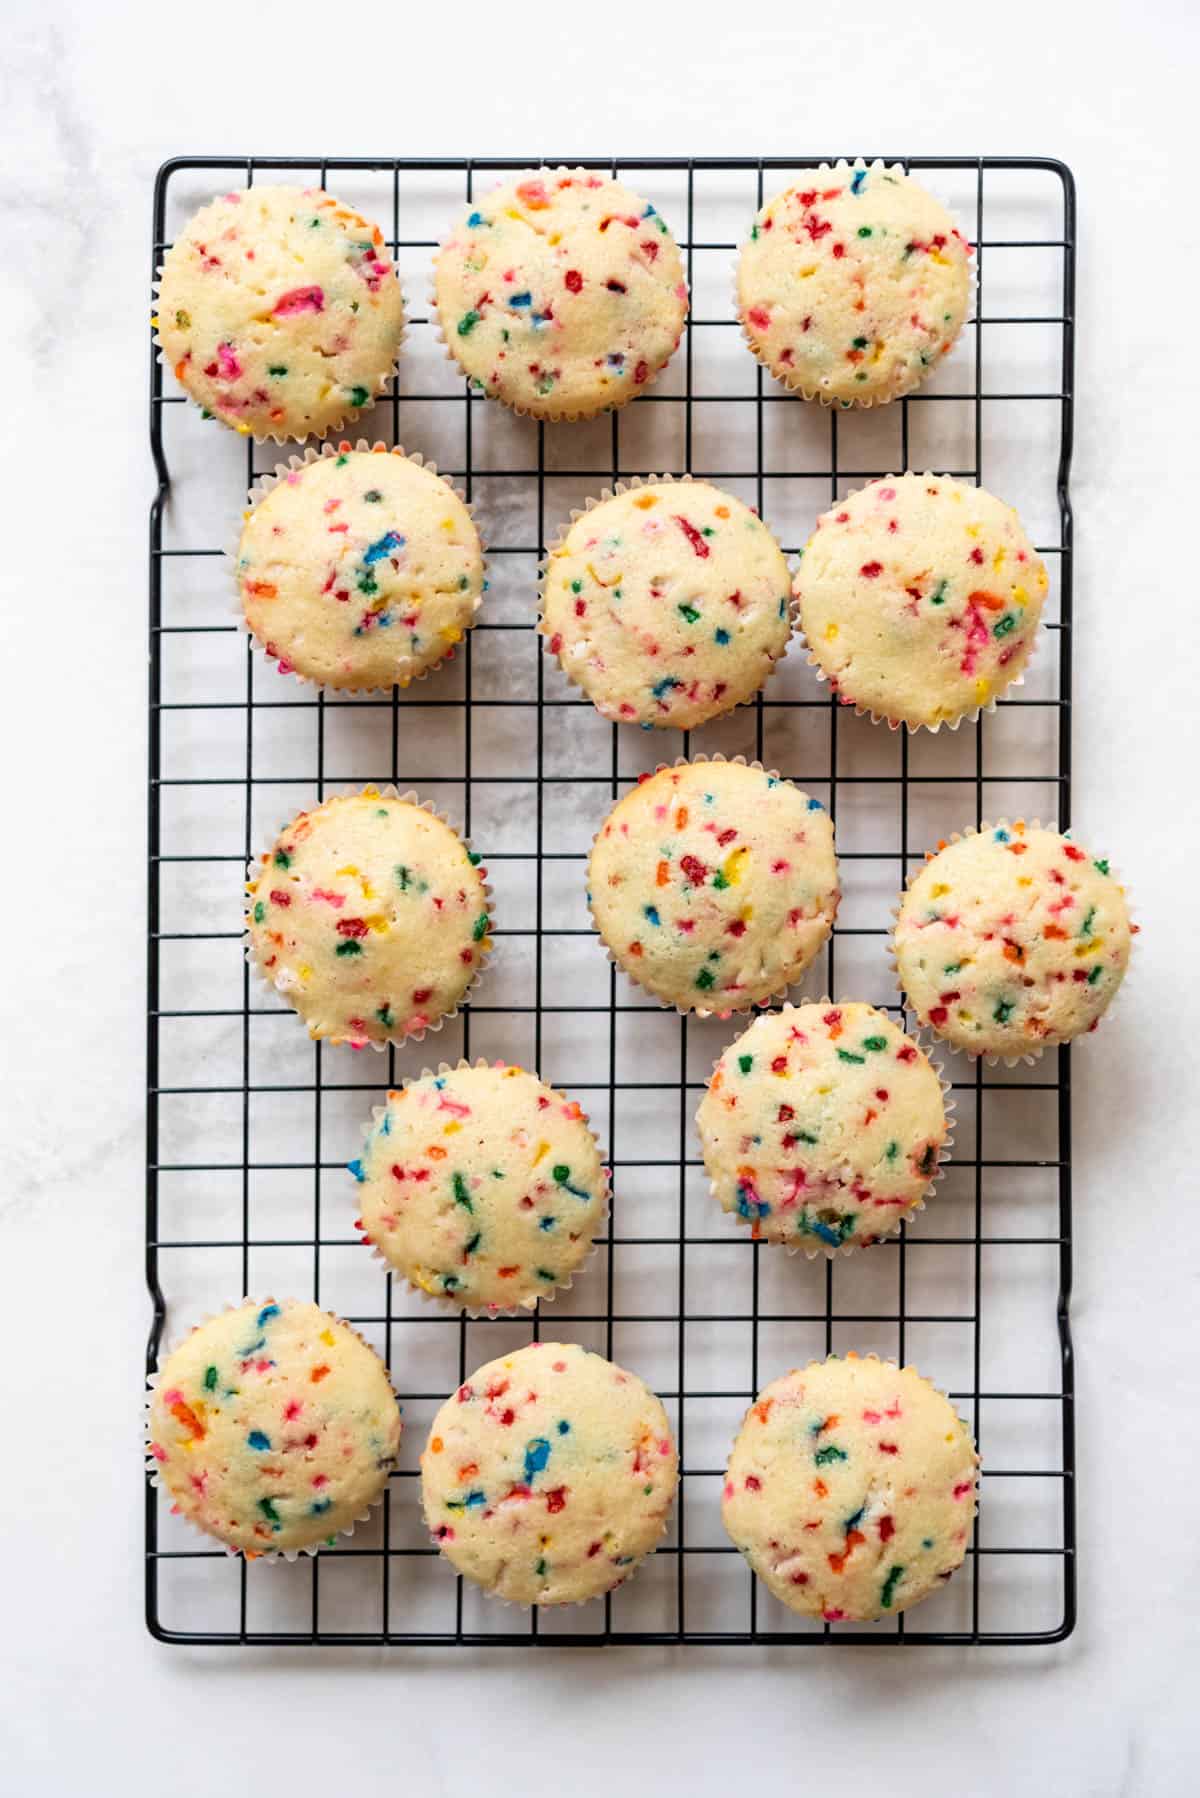 14 unfrosted homemade funfetti cupcakes on a wire cooling rack.